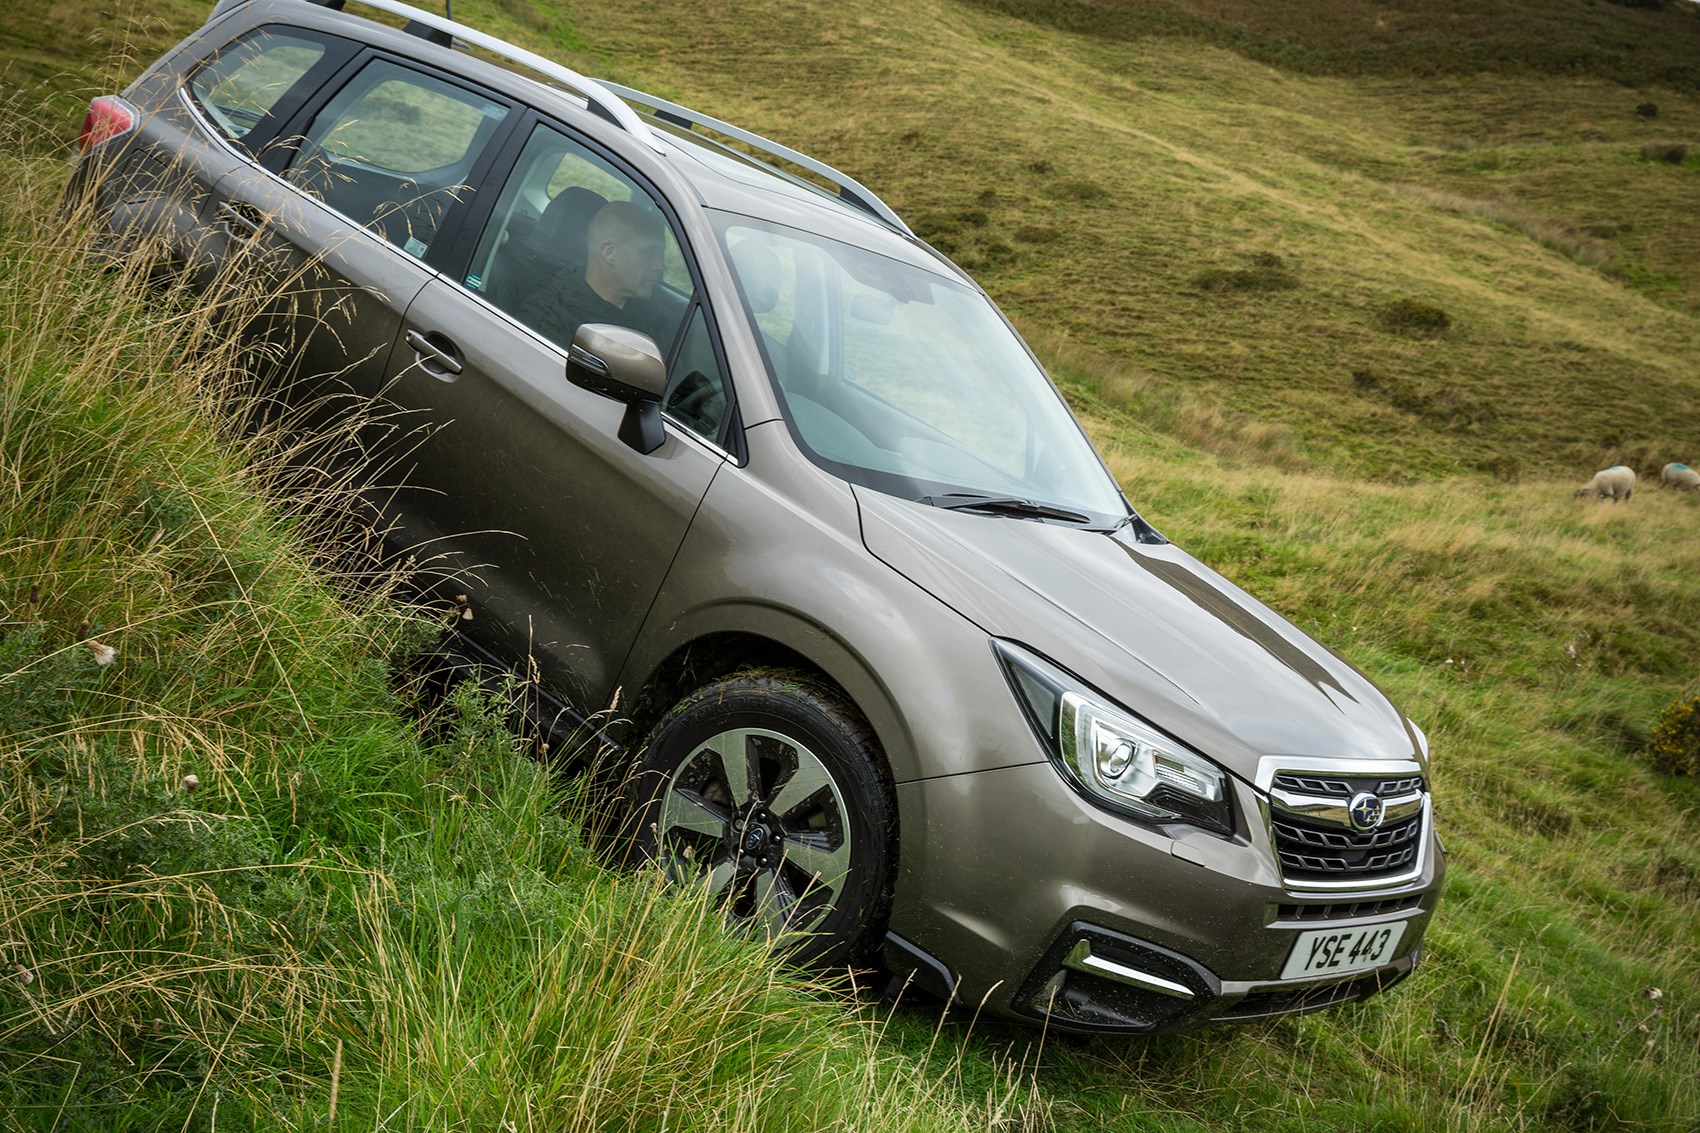 Subaru Forester off-road: not all crossovers will do this